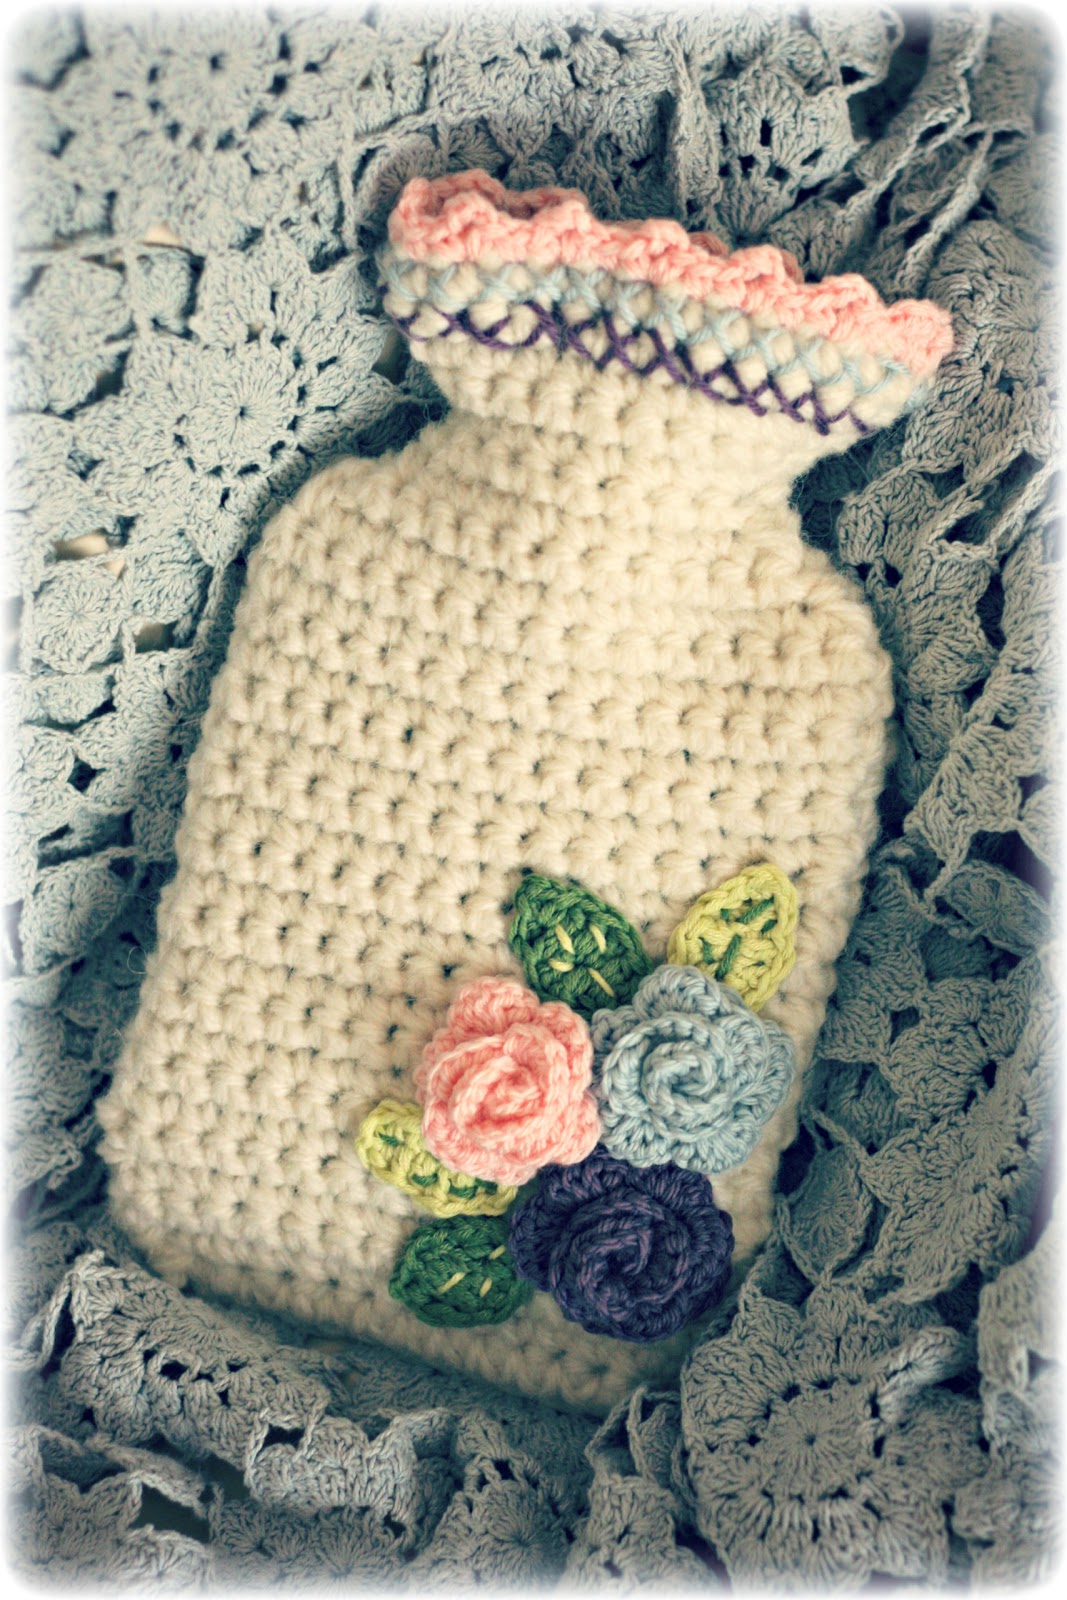 CROCHET A HOT WATER BOTTLE COVER, and a joke at the end, video